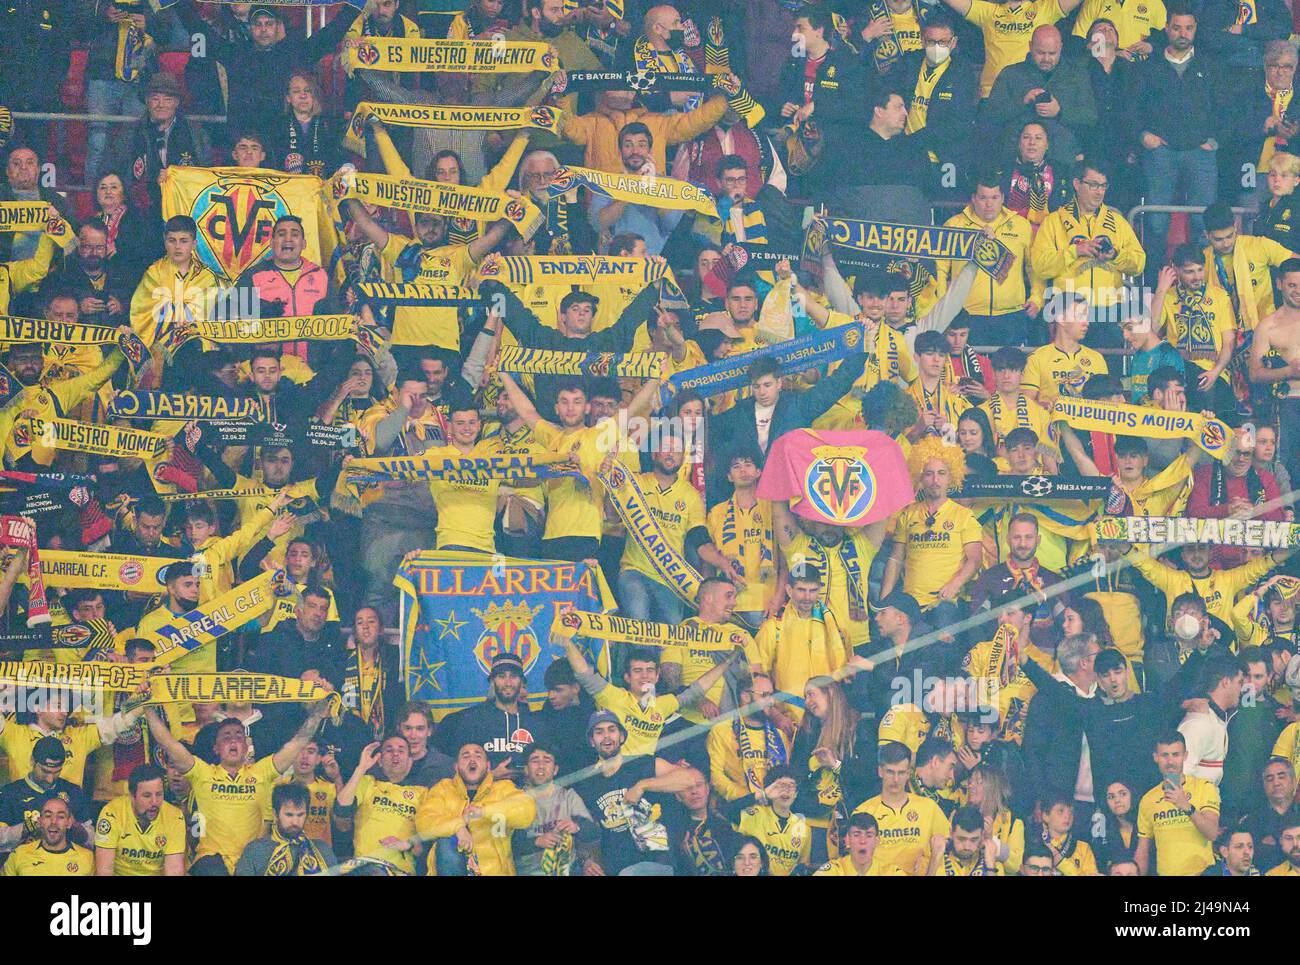 Villarreal Fans celebrate after the match FC BAYERN MUENCHEN